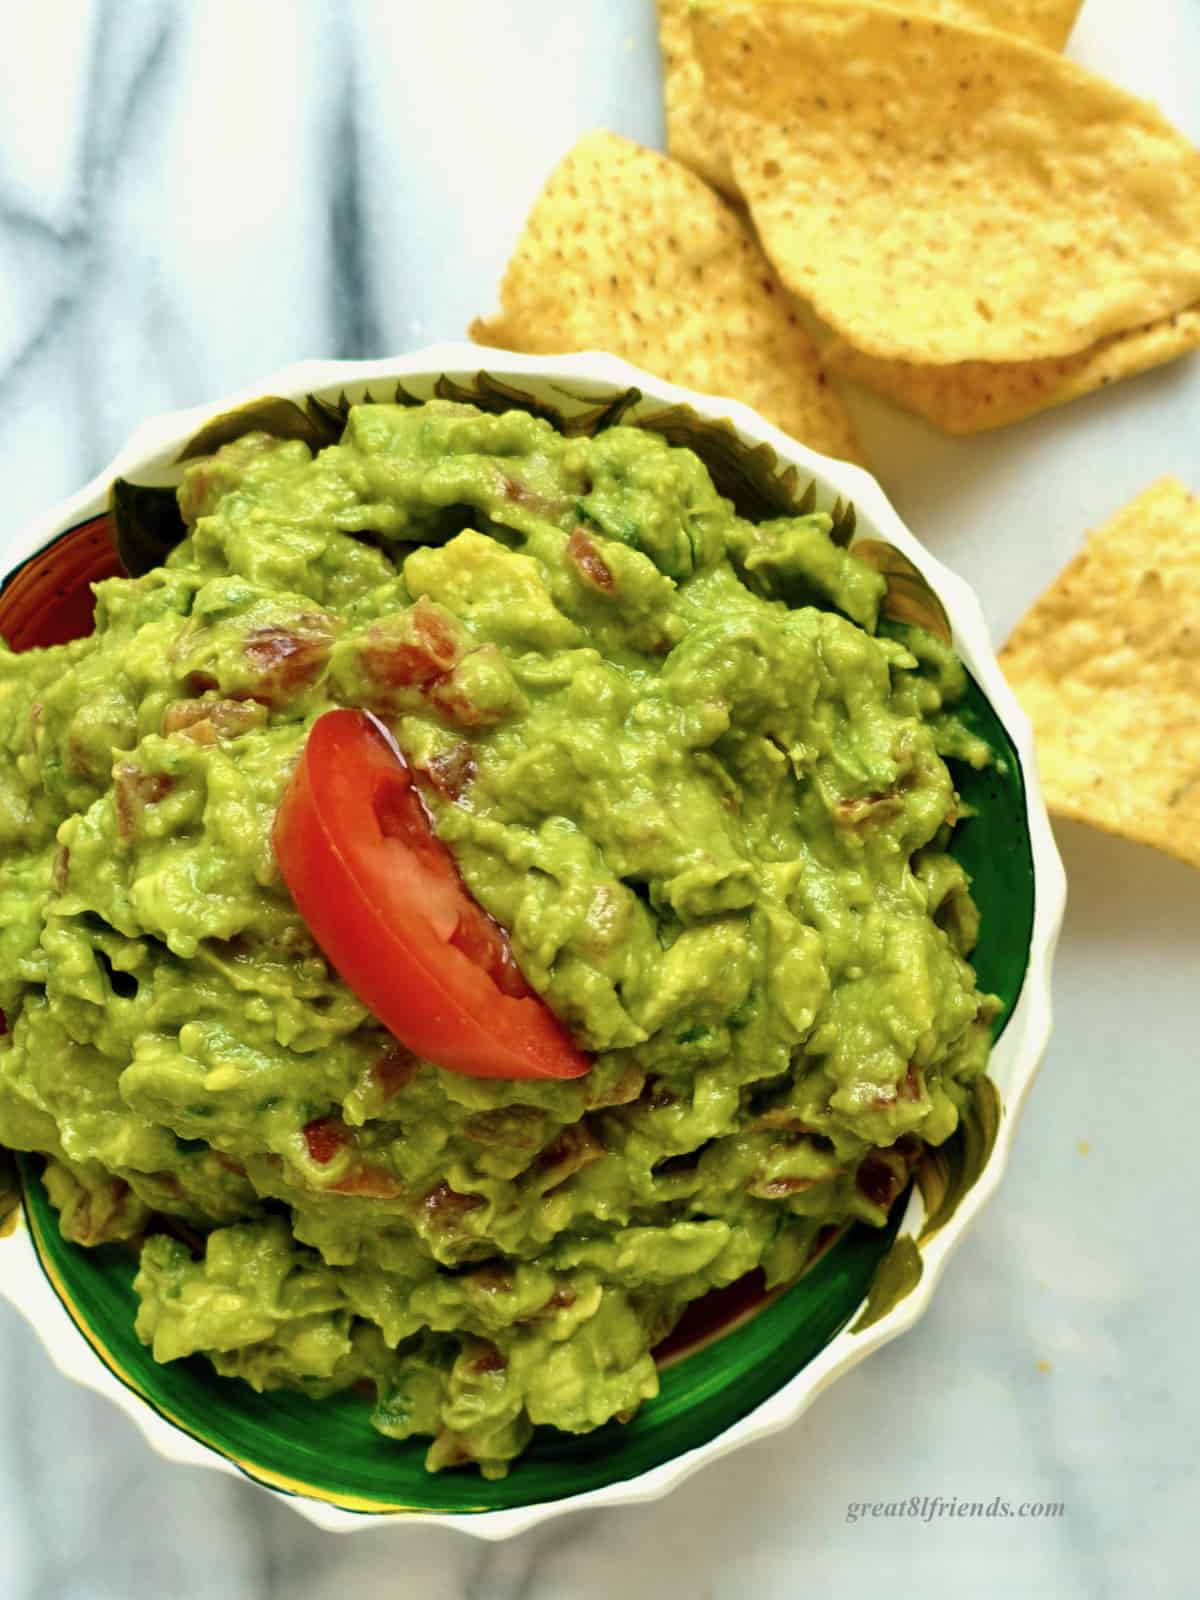 Overhead shot of a bowl of guacamole topped with a wedge of tomato with tortilla chips scattered around.